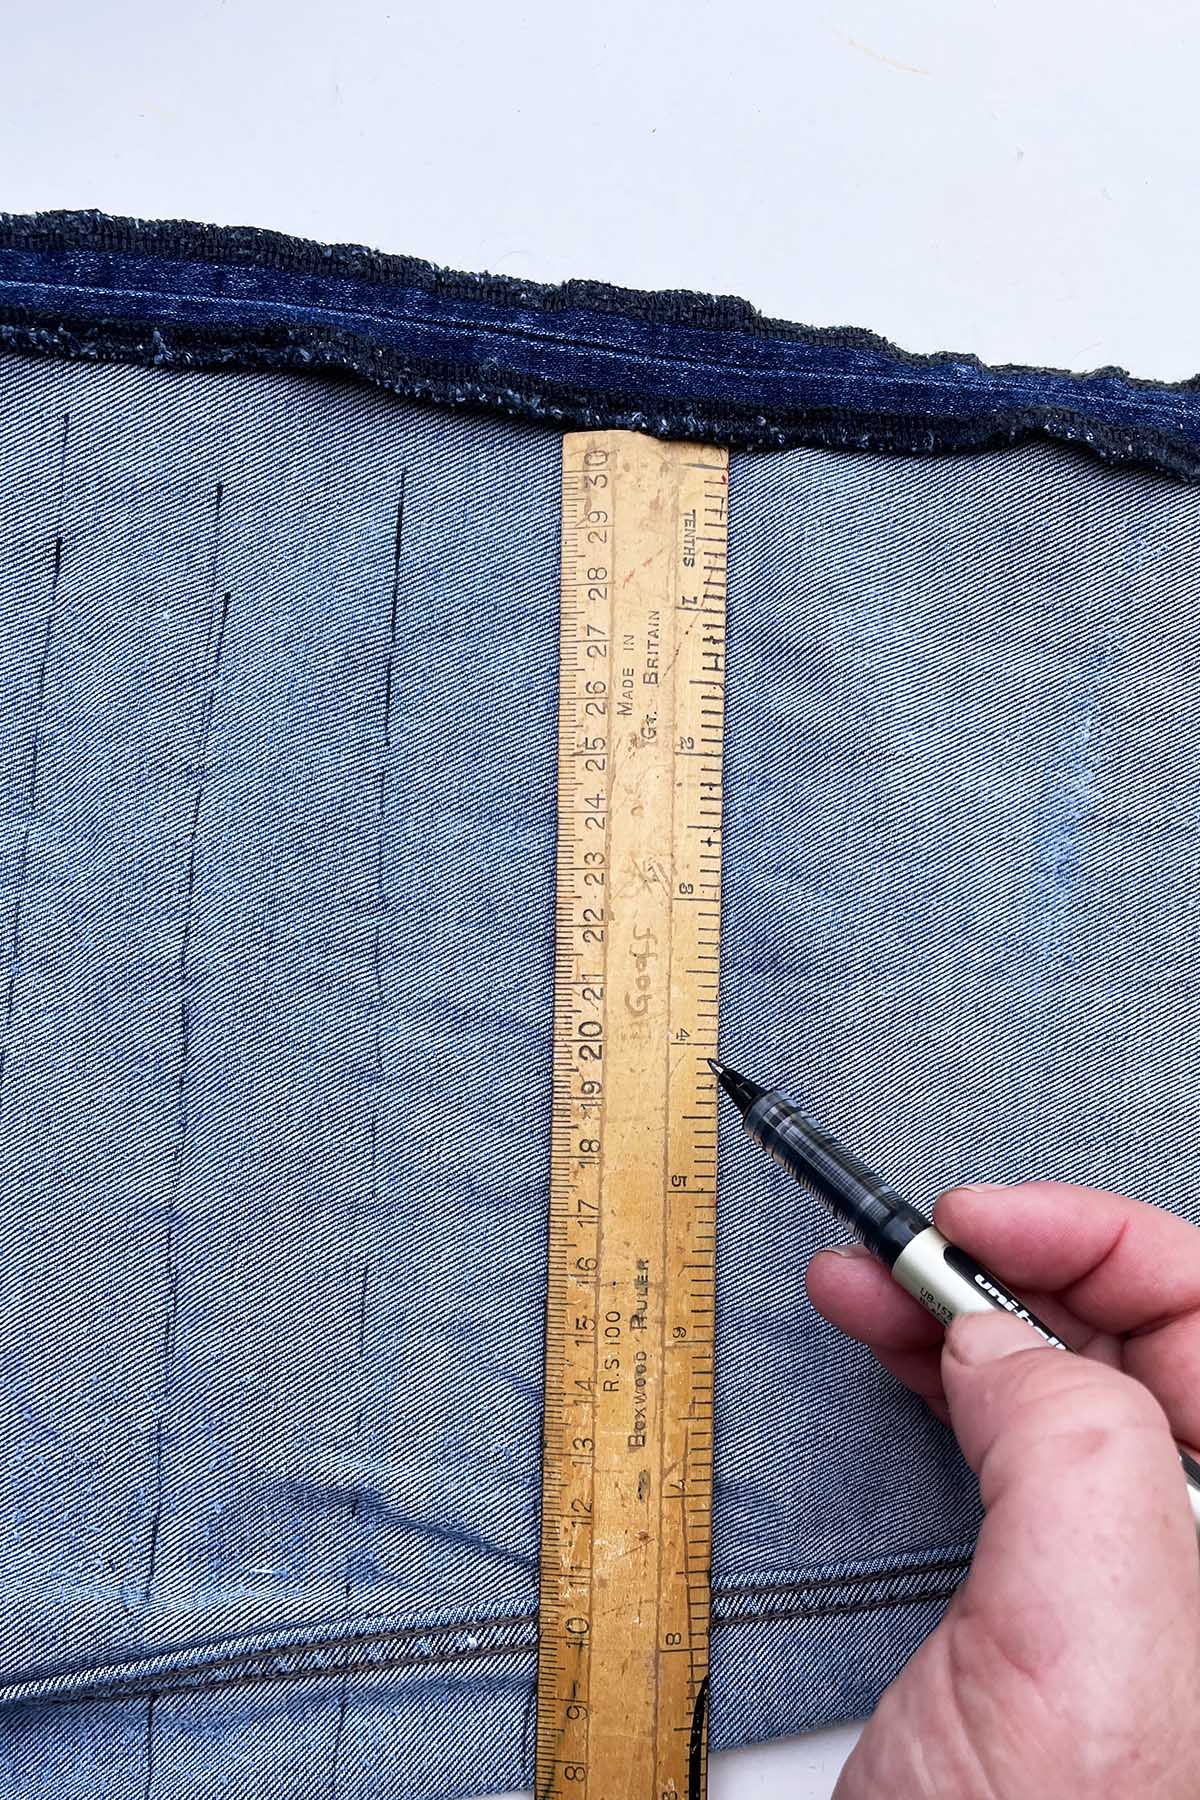 Marking the cut lines on a leg of jeans with pen and ruler